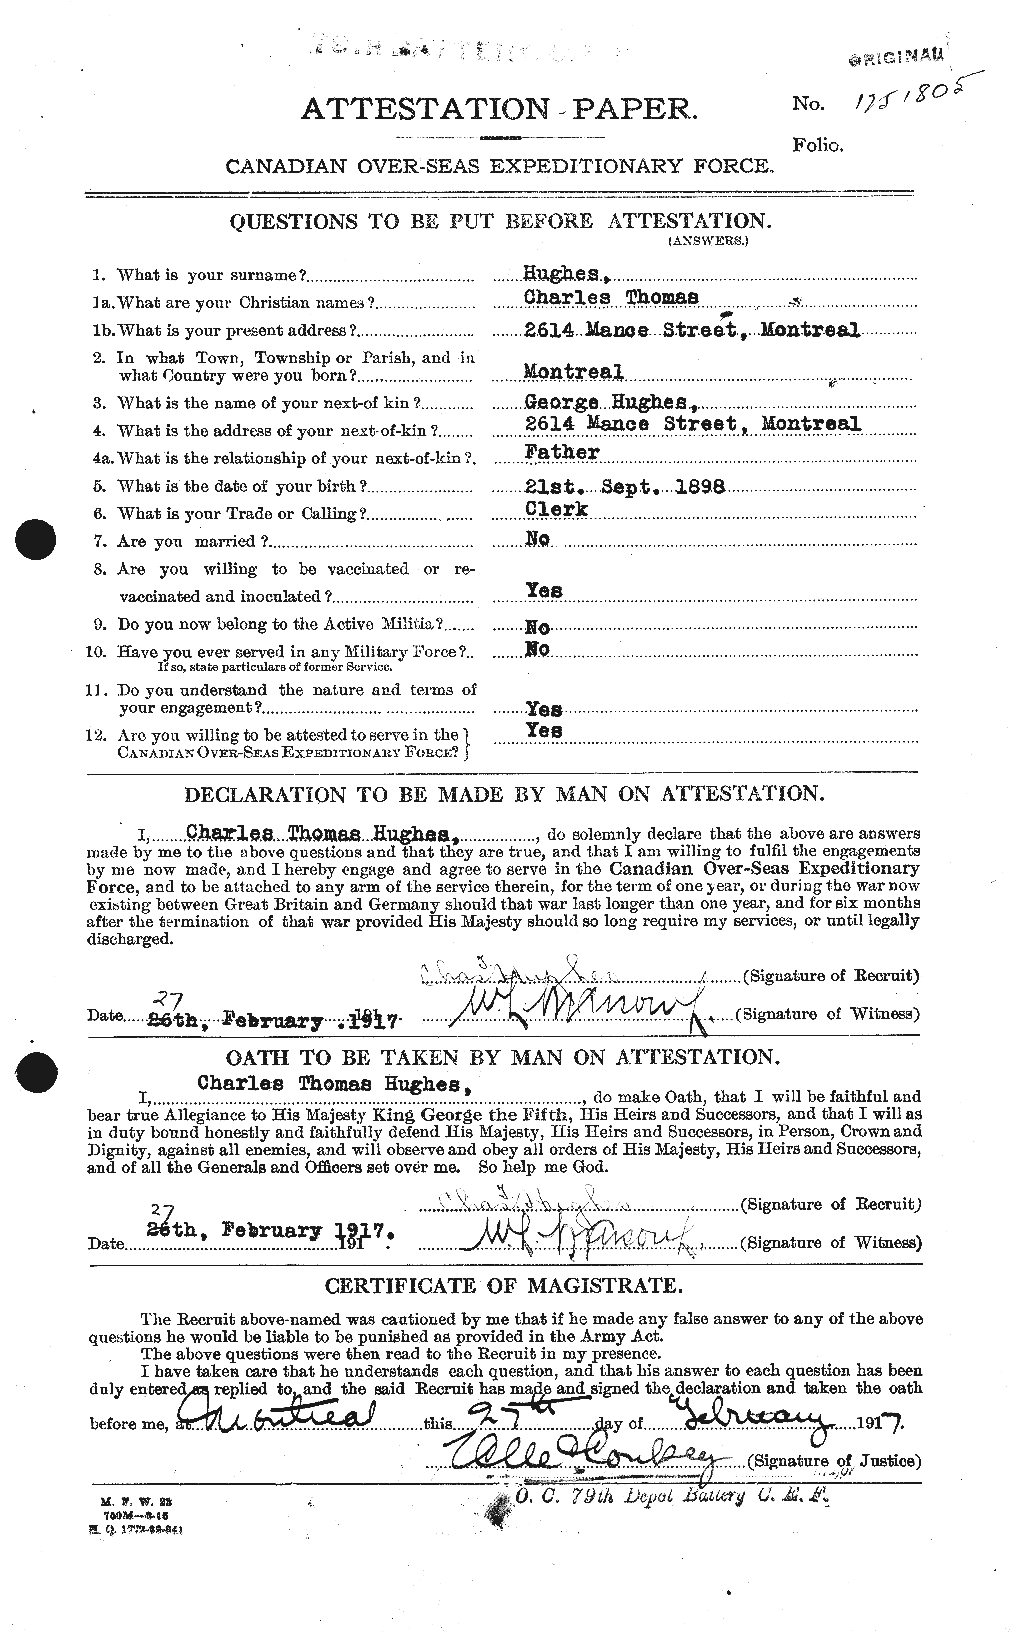 Personnel Records of the First World War - CEF 402614a